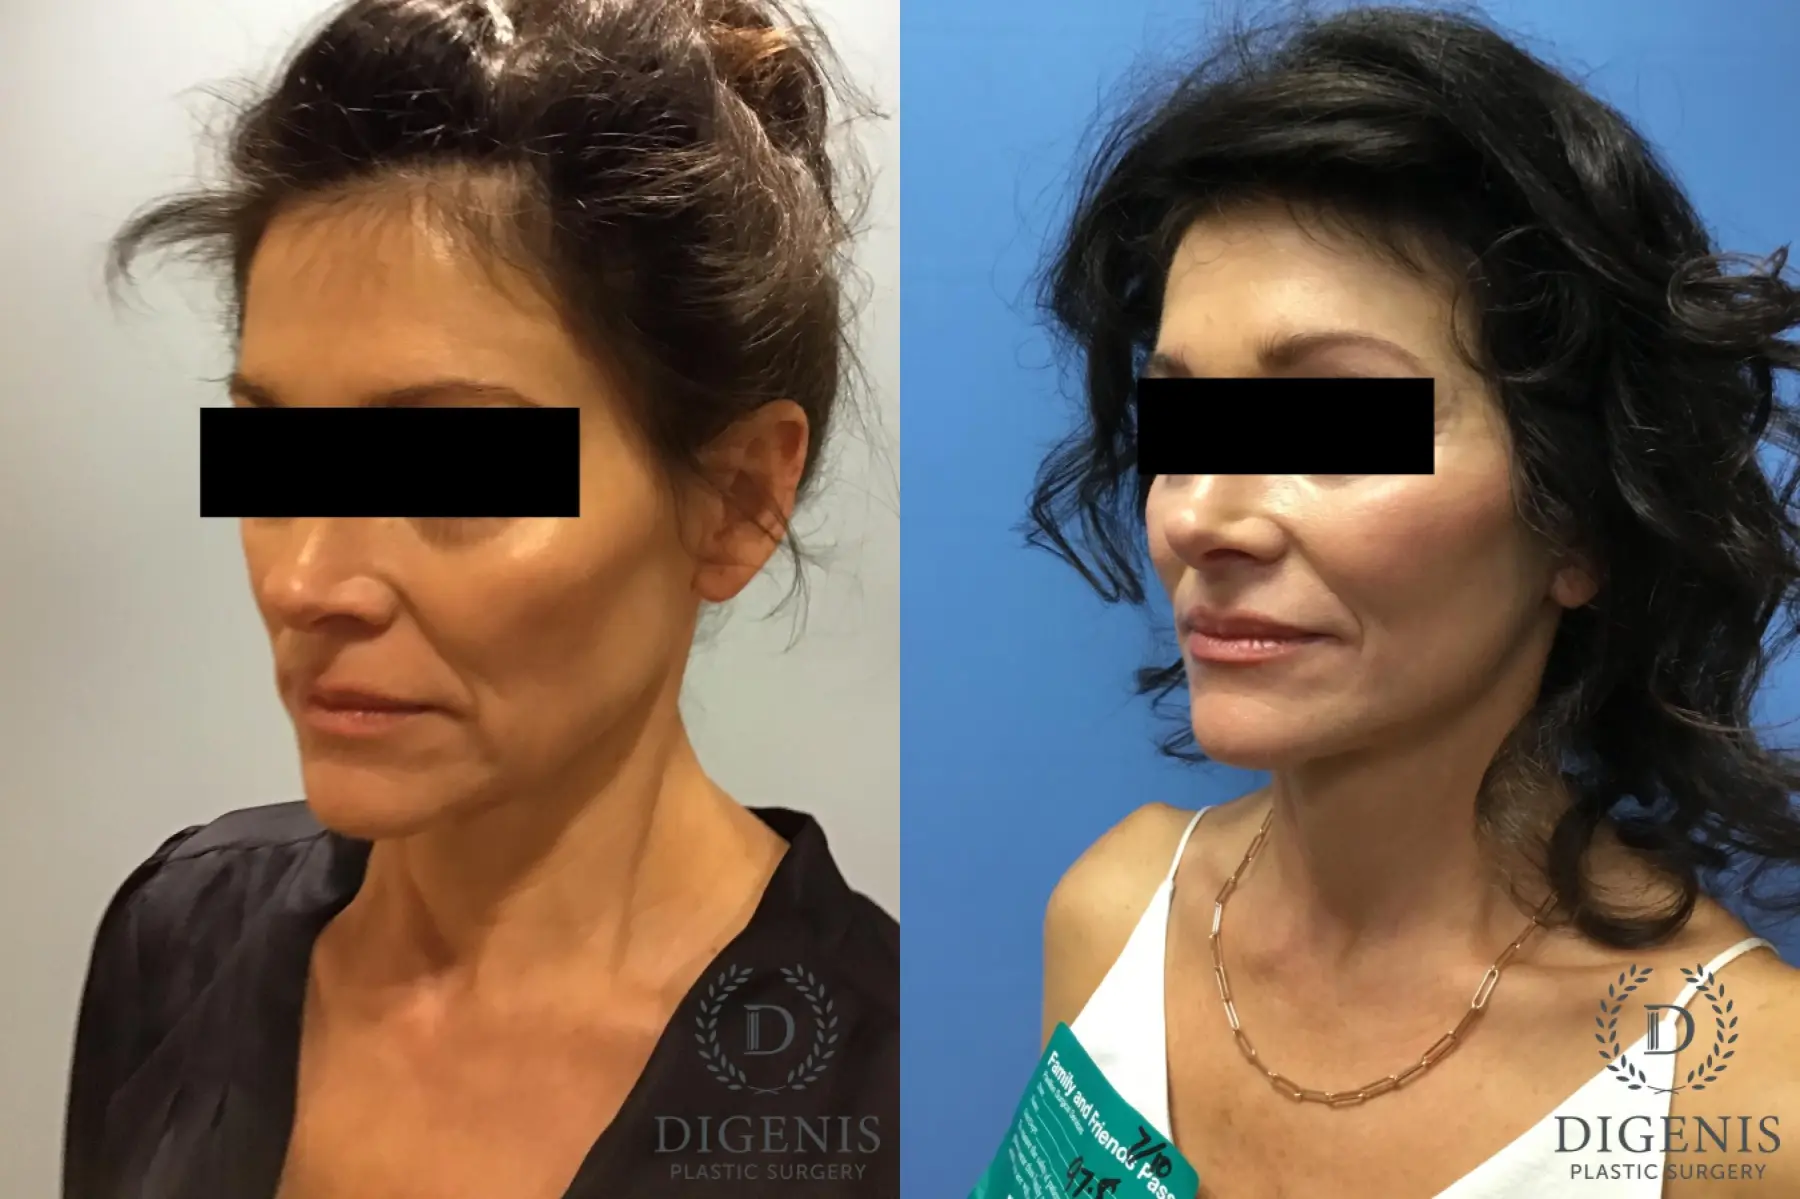 Facelift: Patient 10 - Before and After 2